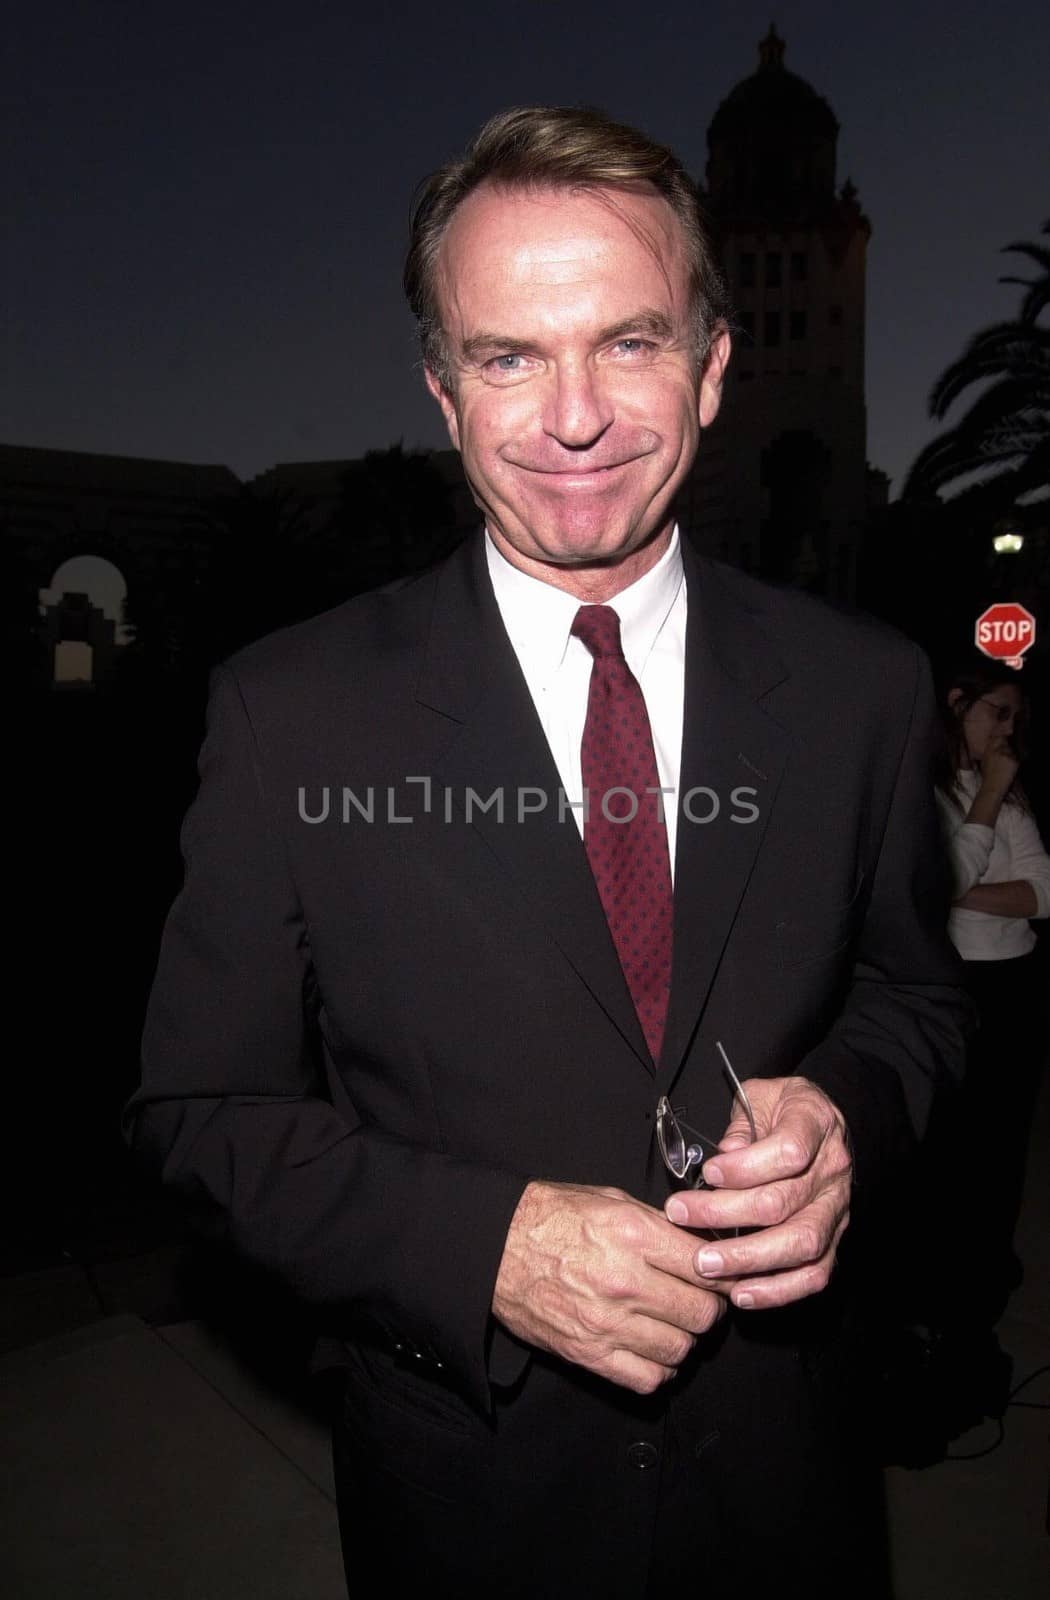 Sam Neill at the WinFemme 2000 Film Festival's closing ceremony in Beverly Hills. 08-20-00